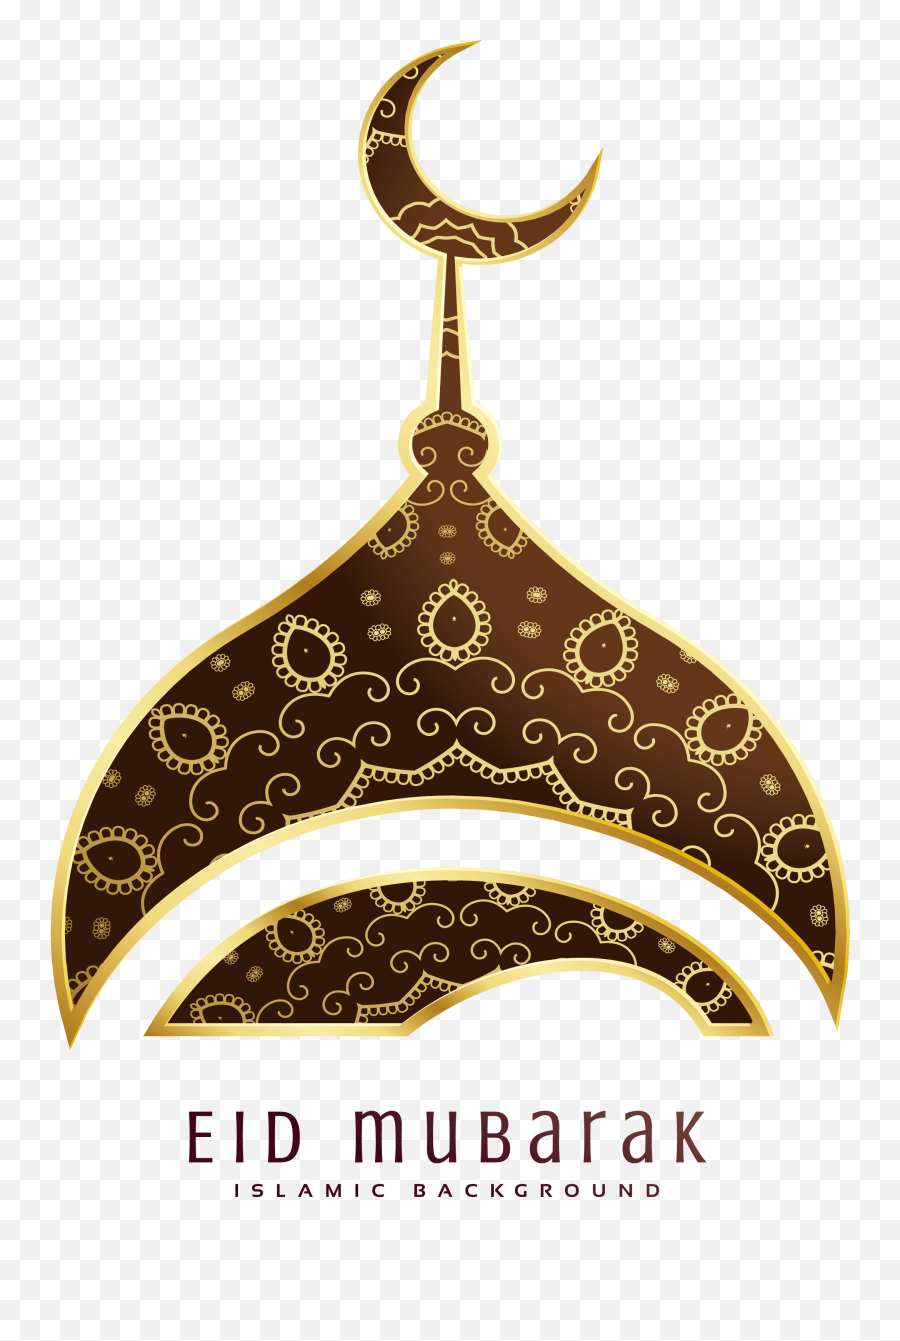 How To Download New Eid Backgrounds And Png Text - Eid Transparent Background Eid Mubarak Transparent Png,Backgrounds Png